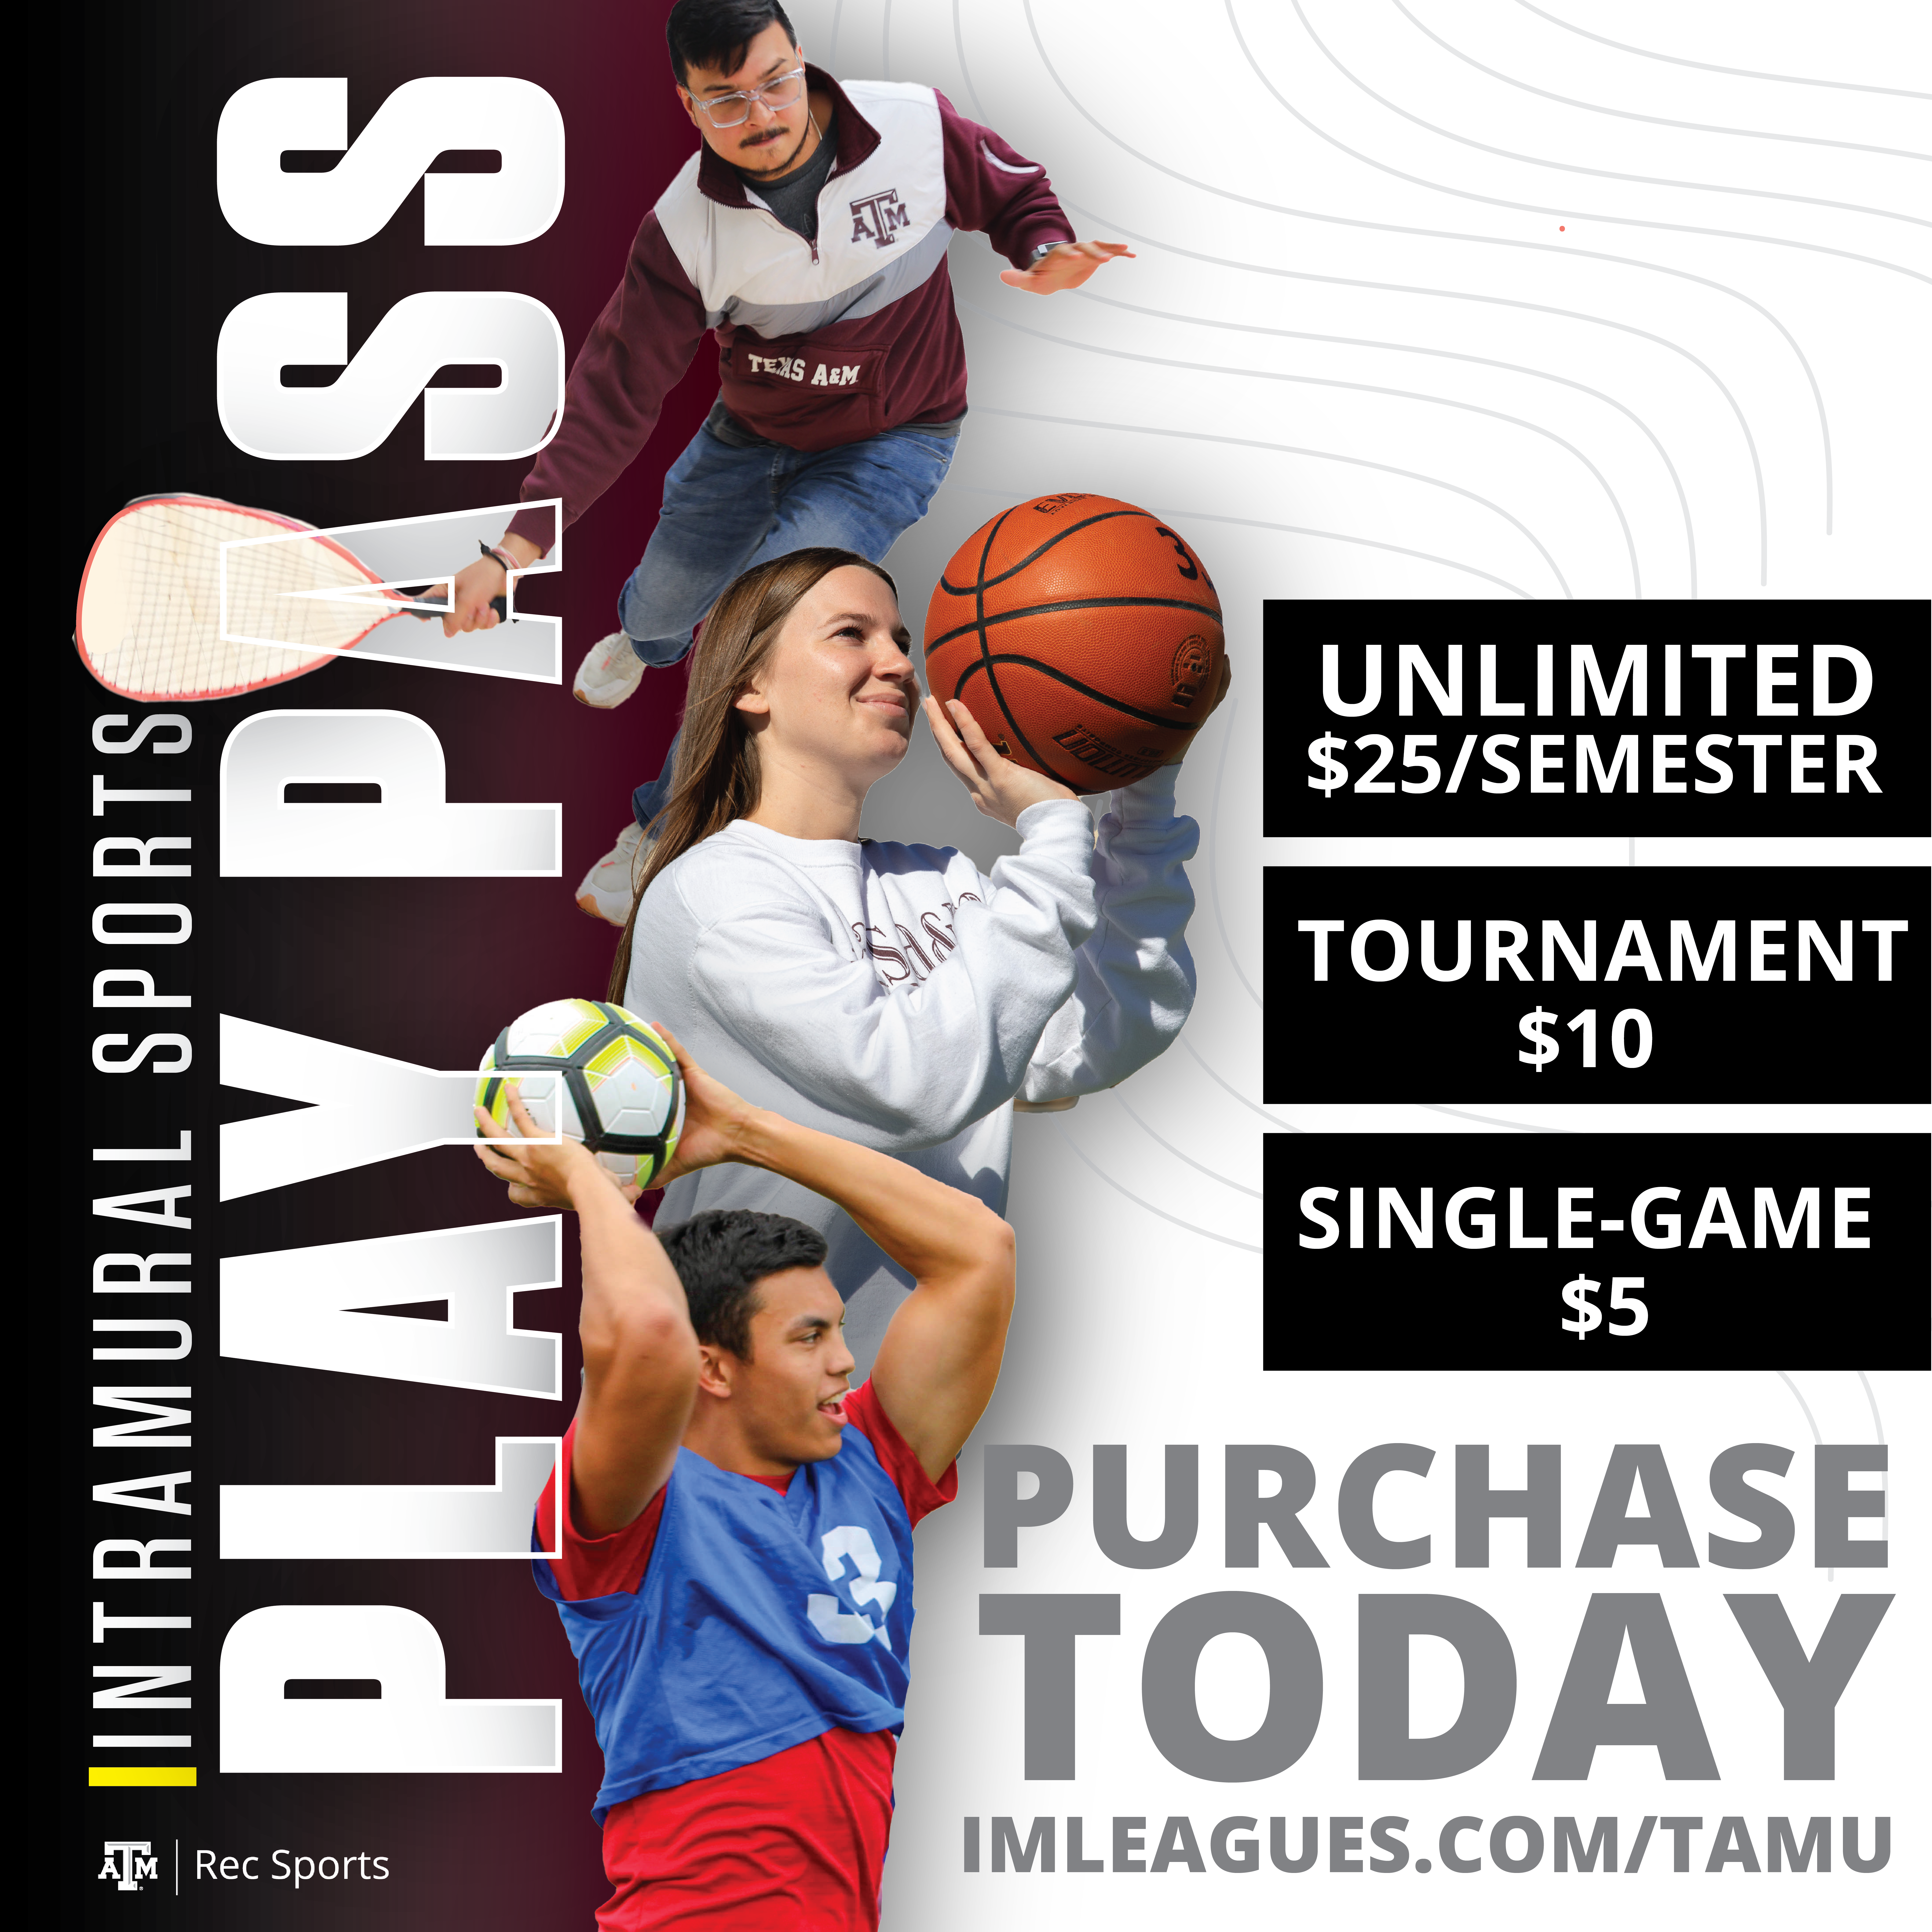 Intramural Sports Play Pass that includes three people playing soccer, basketball, and raquetball. It has text on the right side that states: unlimited play pass: $25/semester, Tournament pass: $10, or Single Game pass: $5